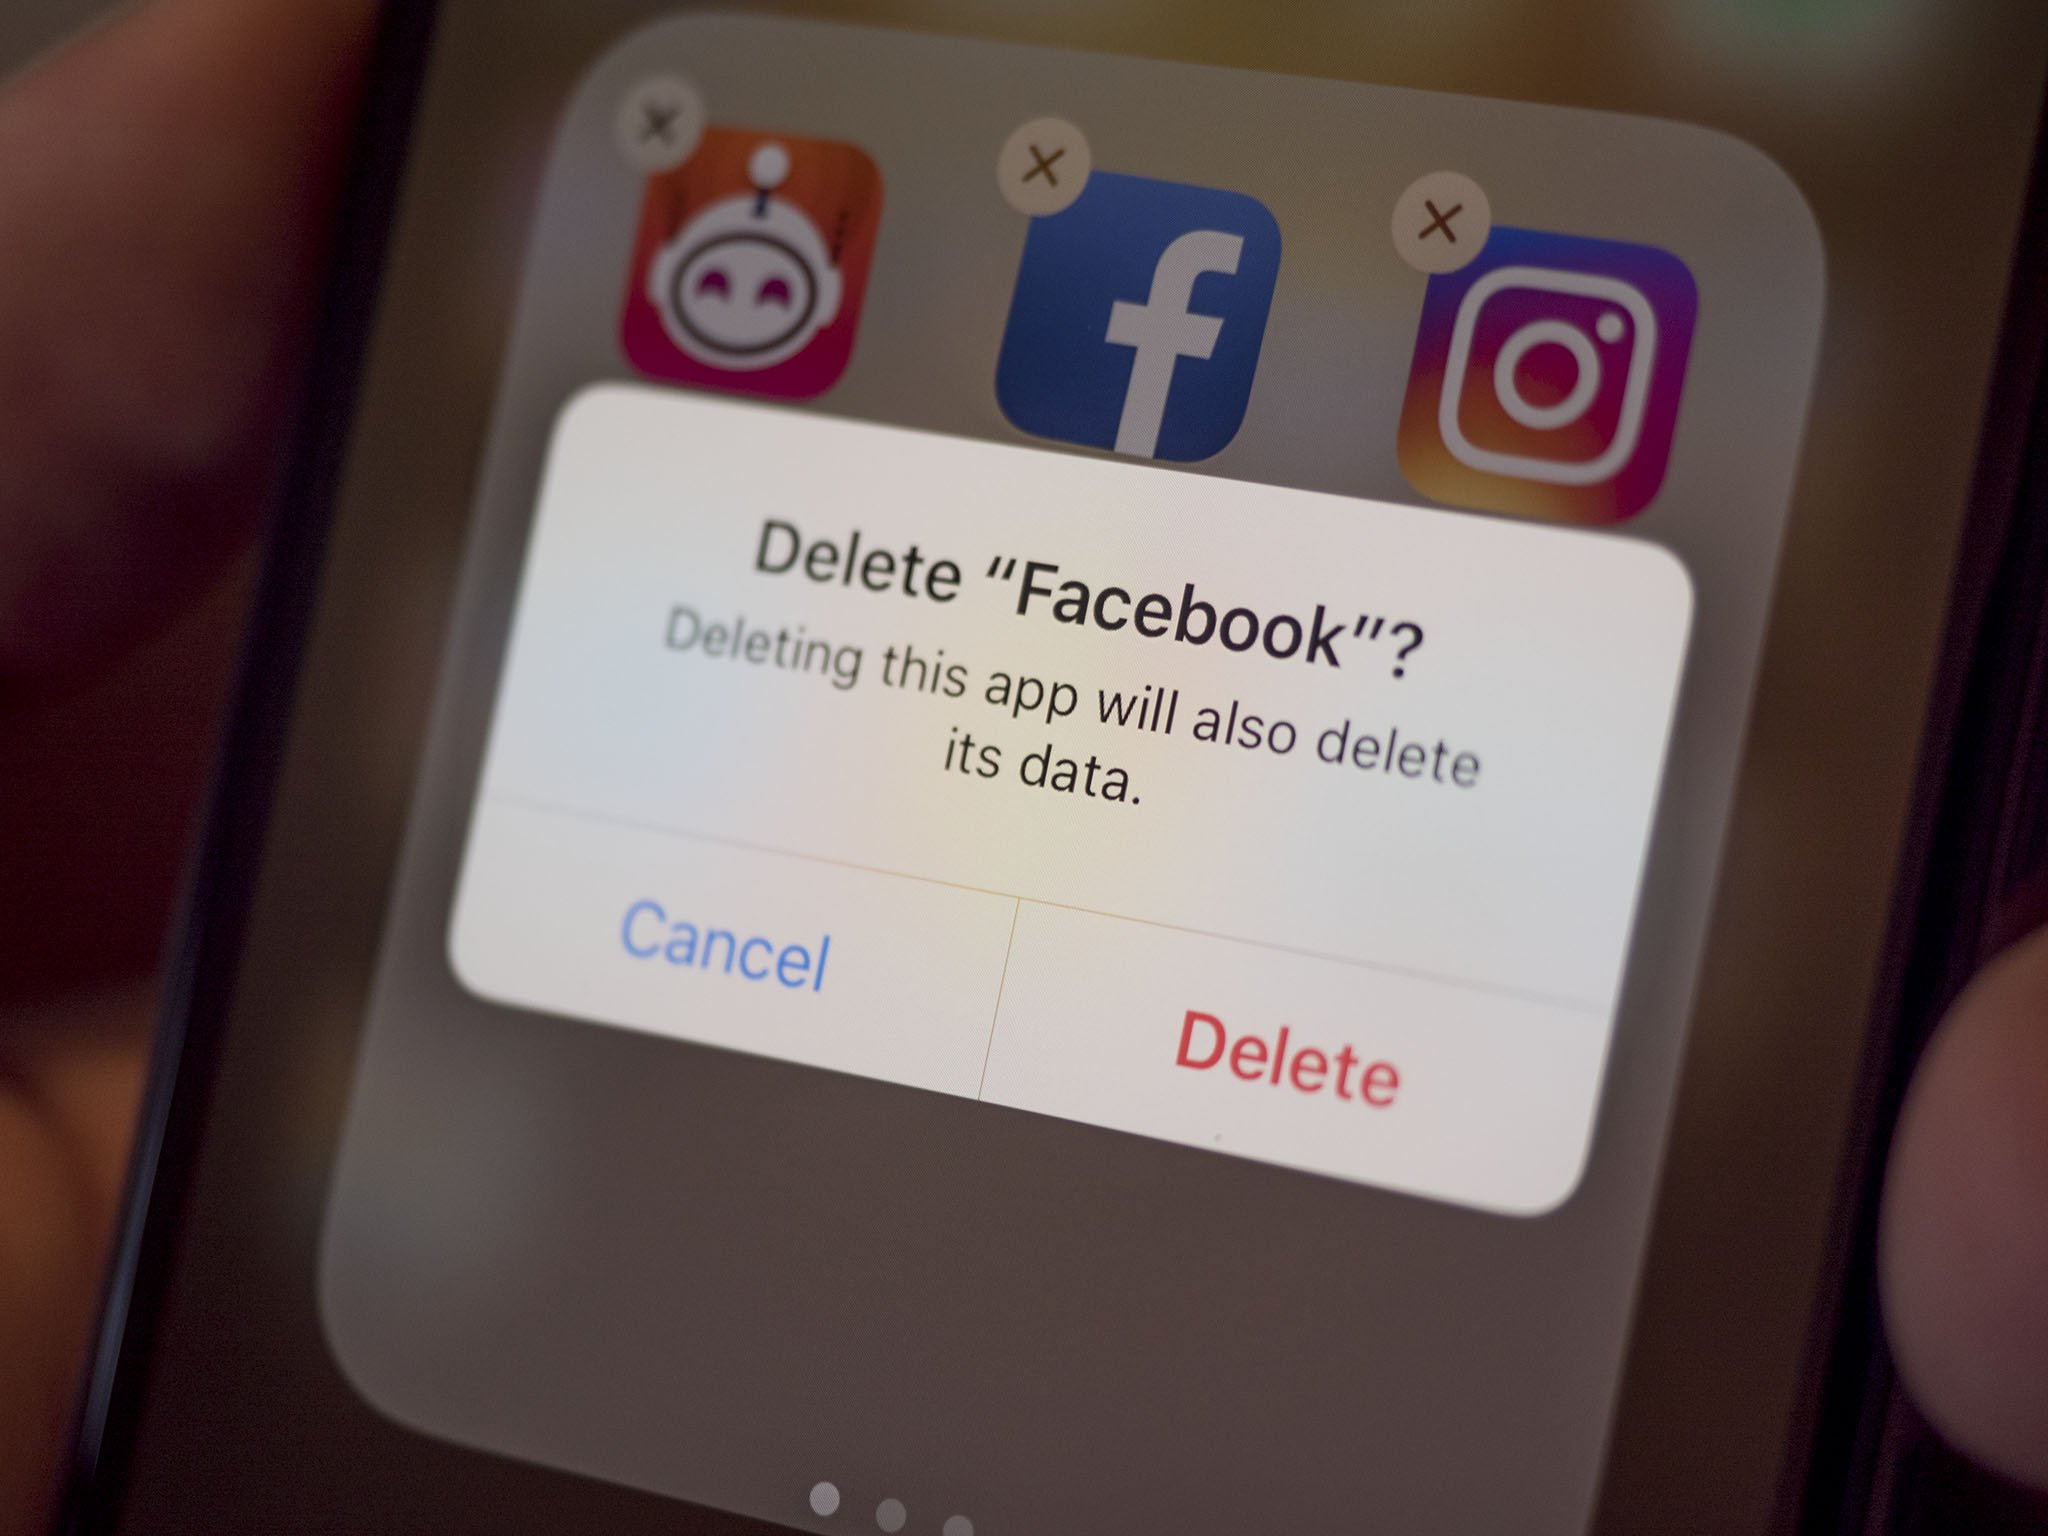 Facebook announces new privacy tools for users following data controversy